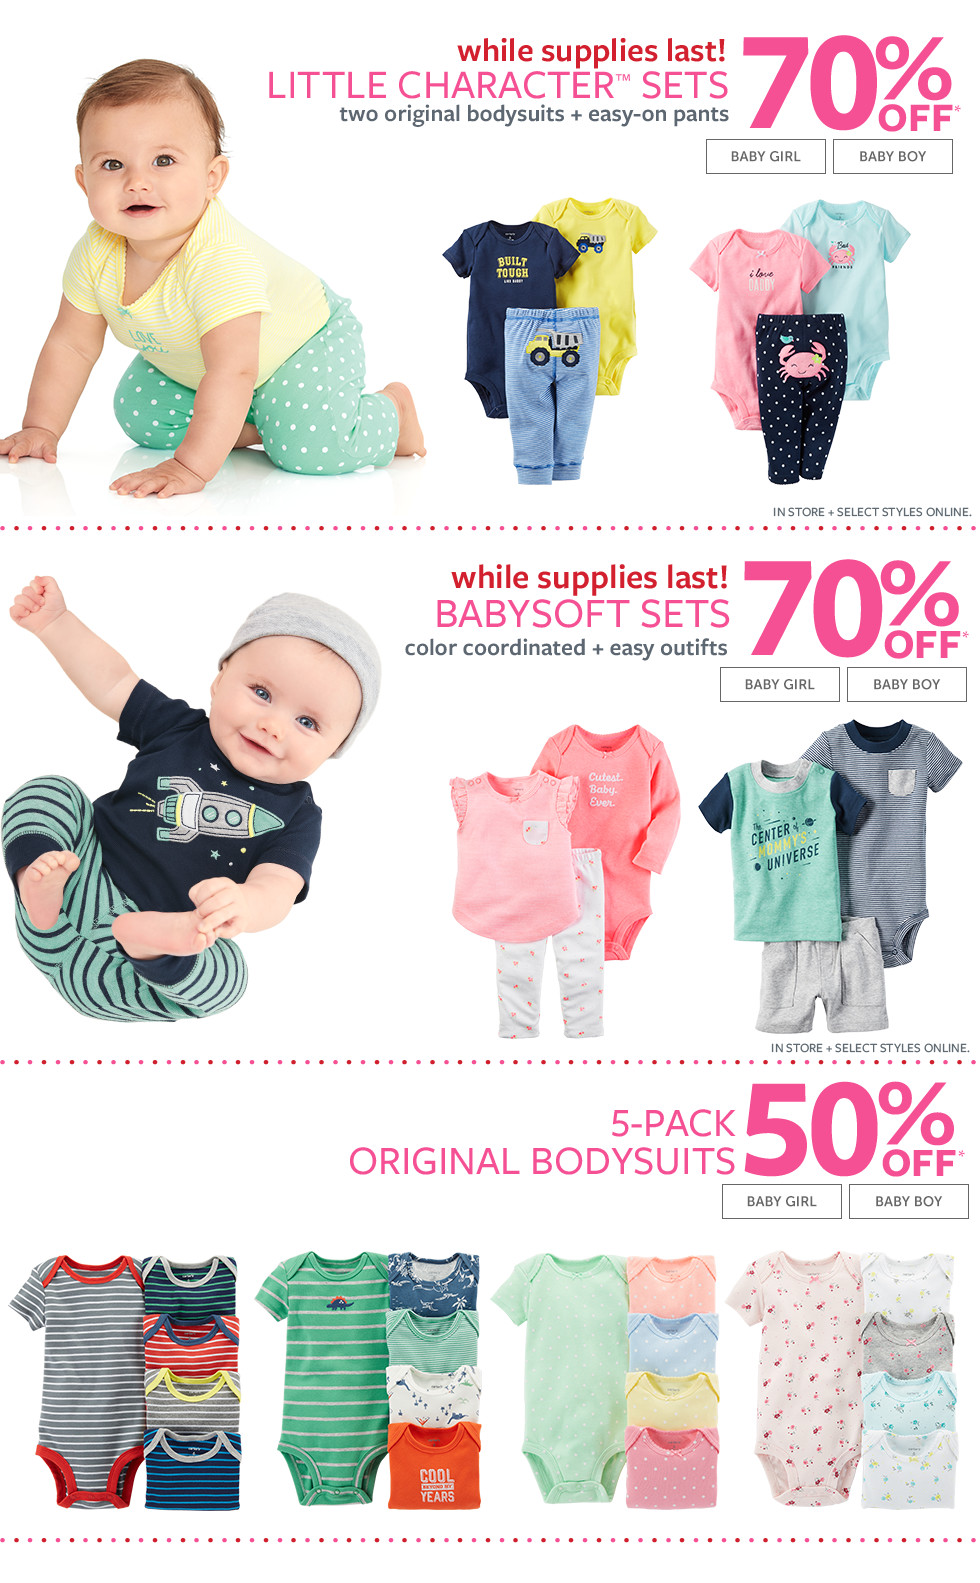 What are some popular kids' clothing stores?